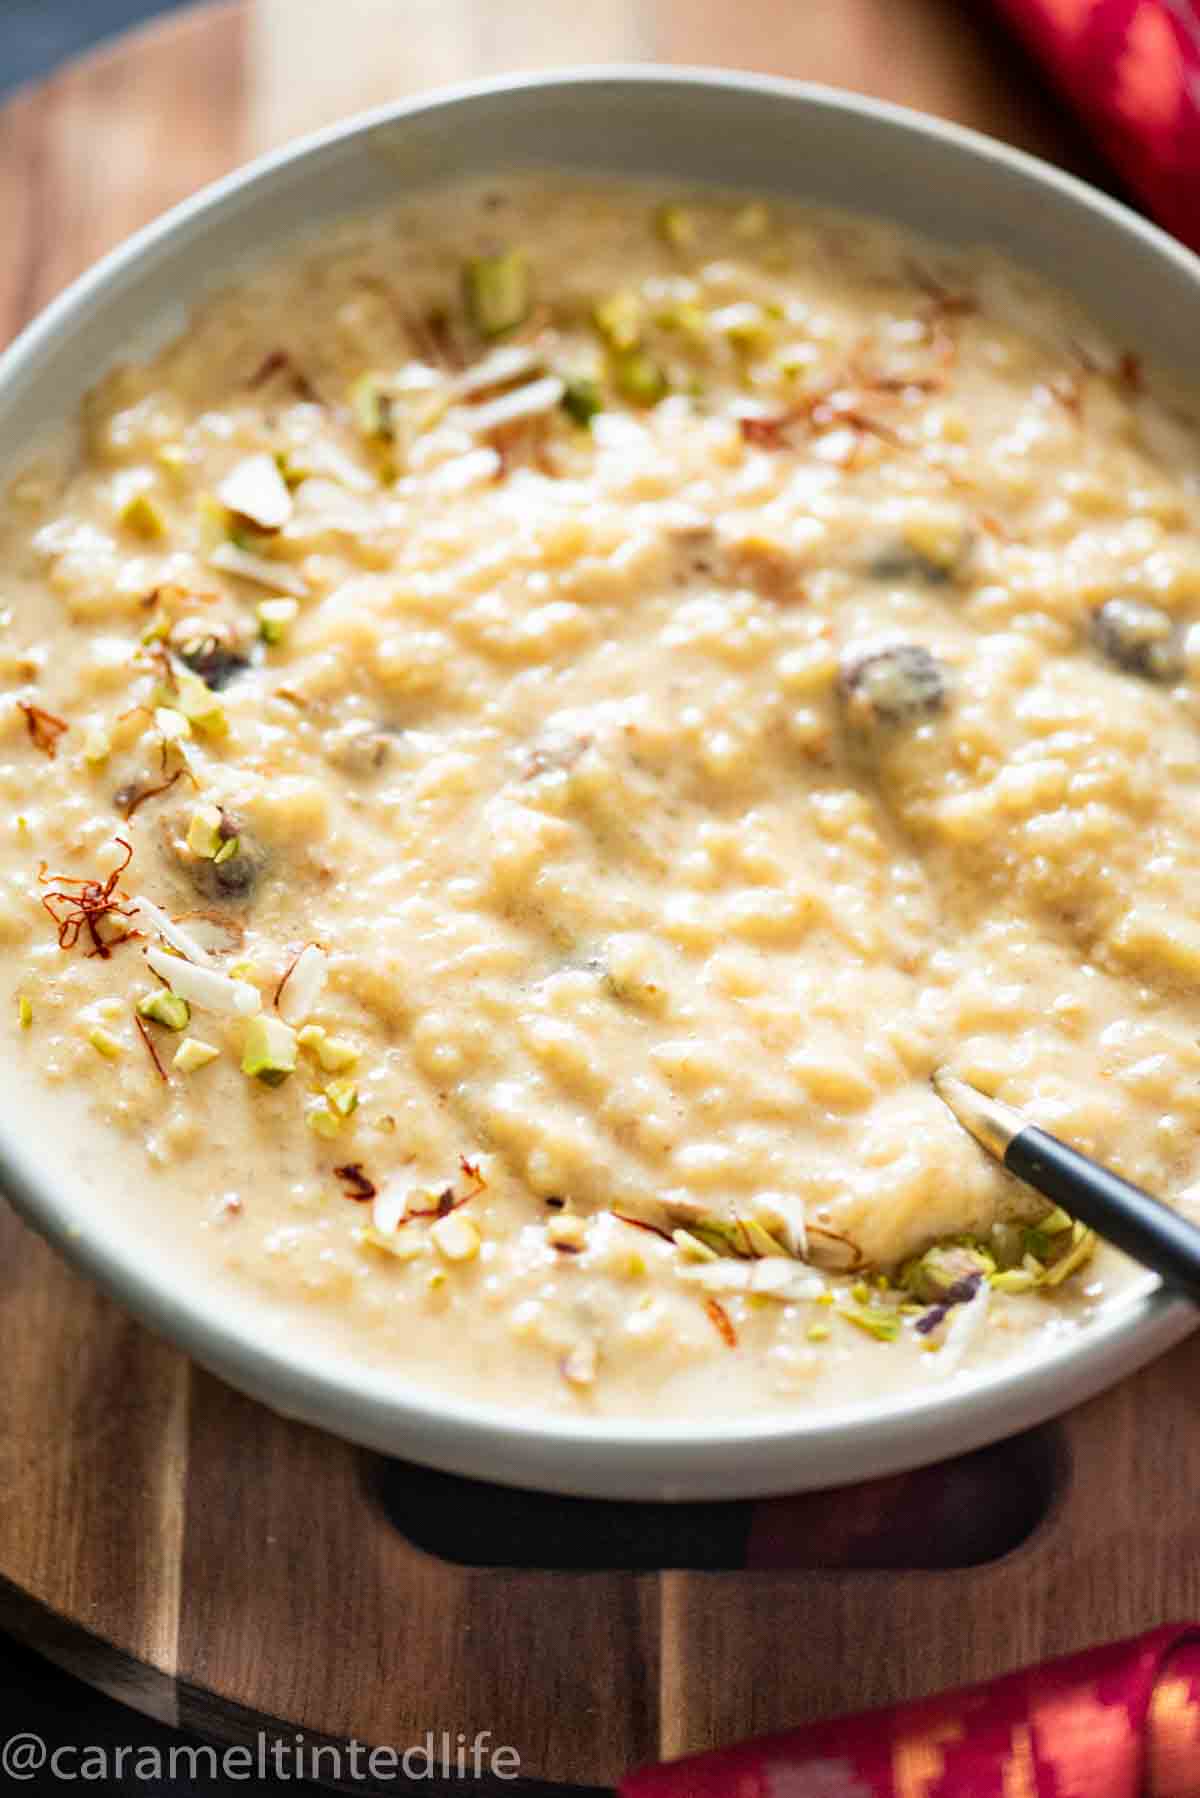 Bowl of rice pudding with pistachios and saffron 